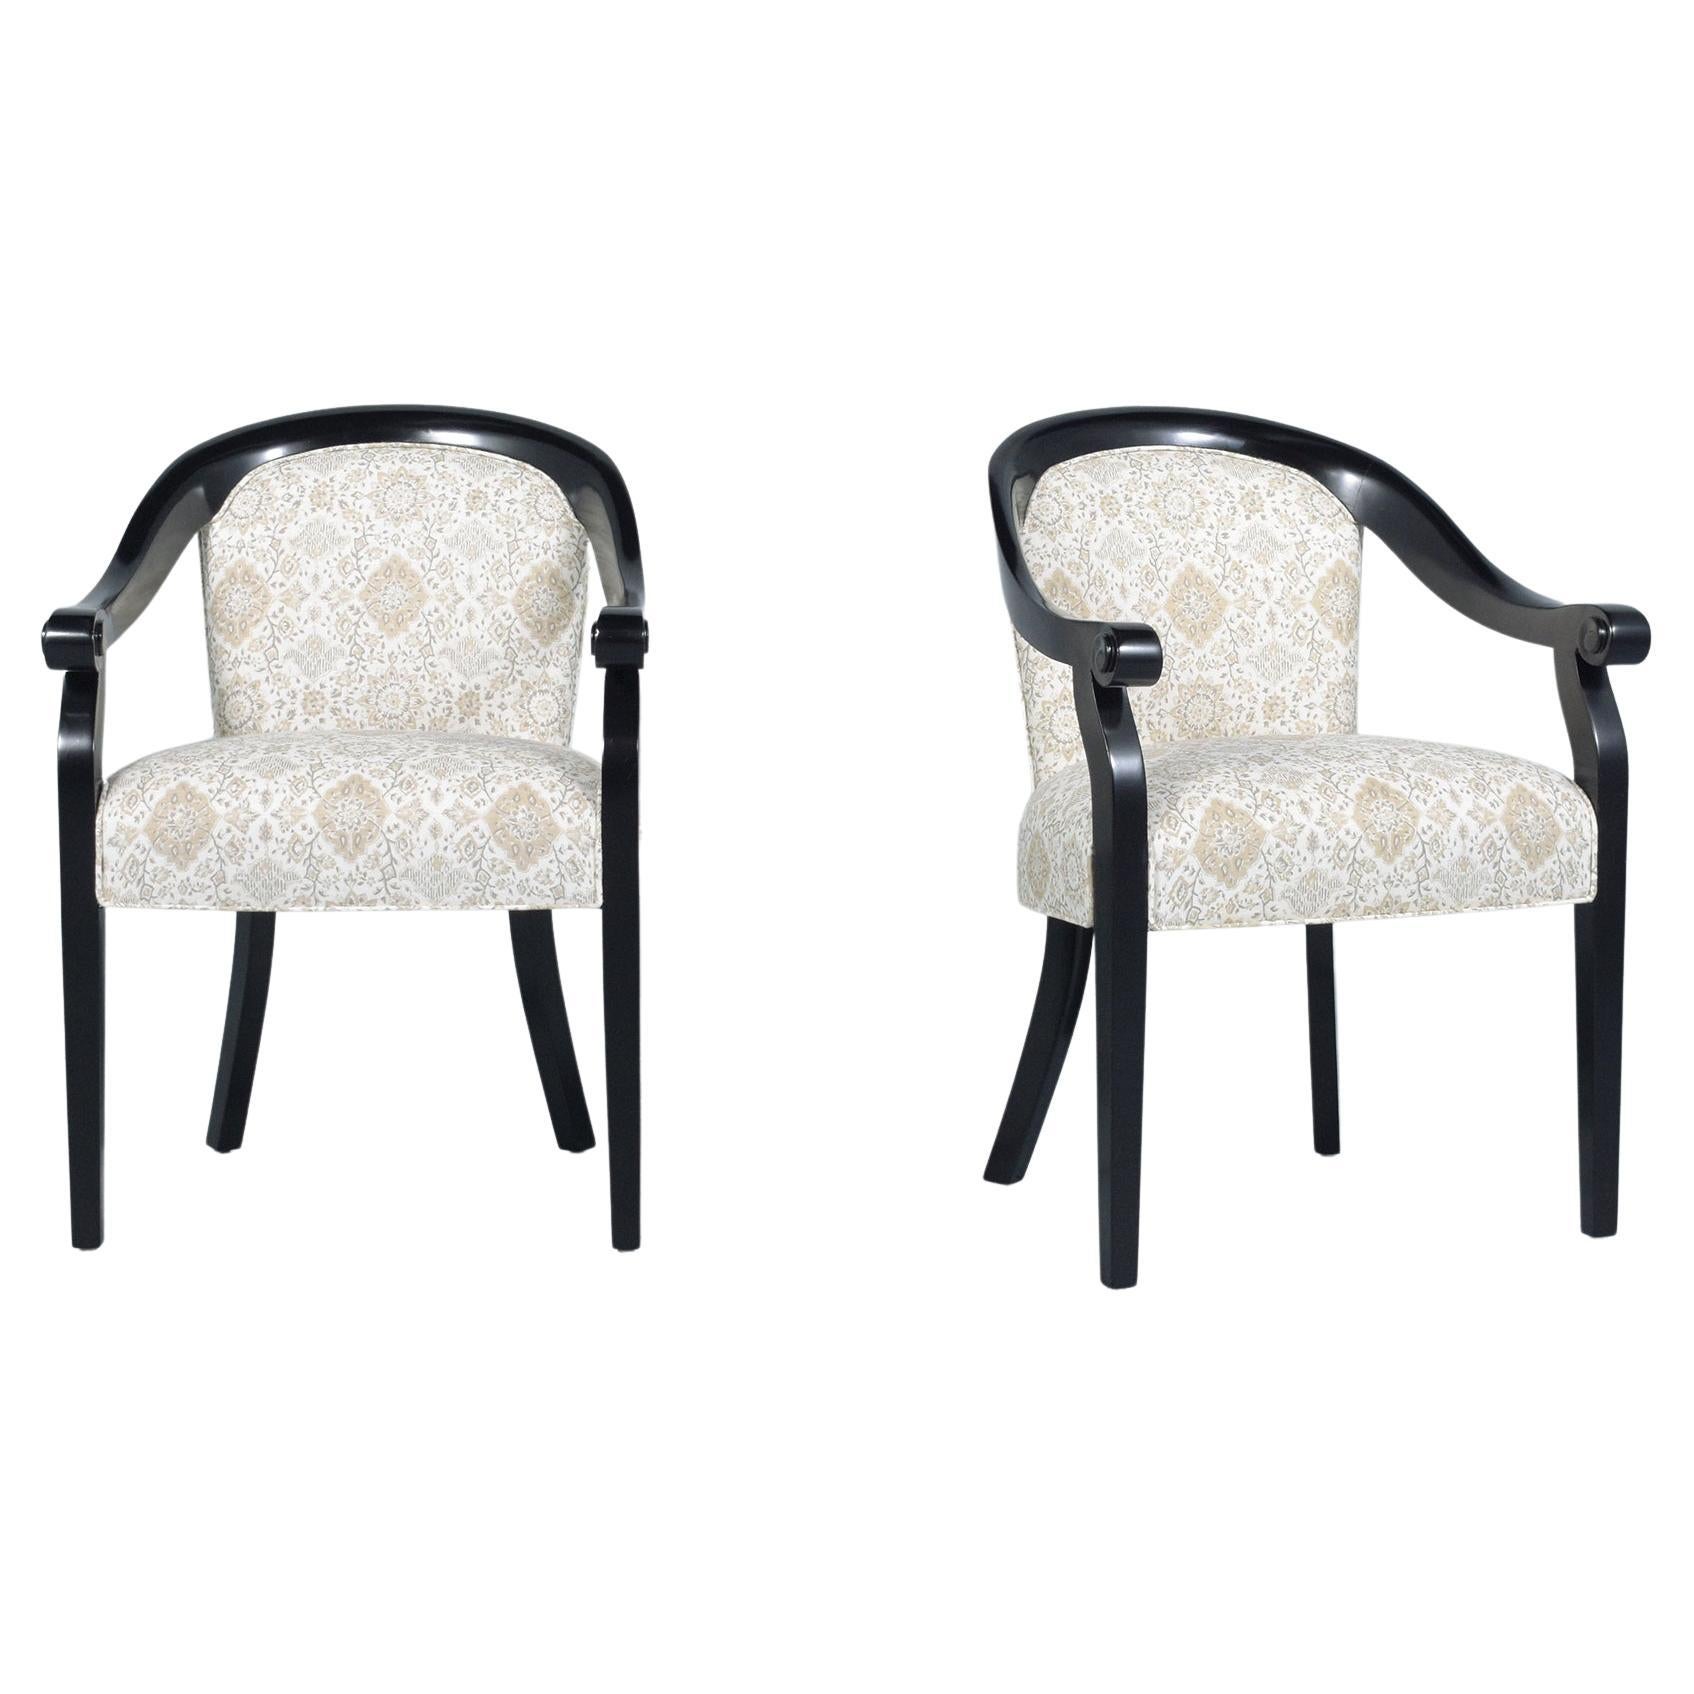 1960s Hickory Modern Black Lacquered Armchairs with Patterned Linen Upholstery For Sale